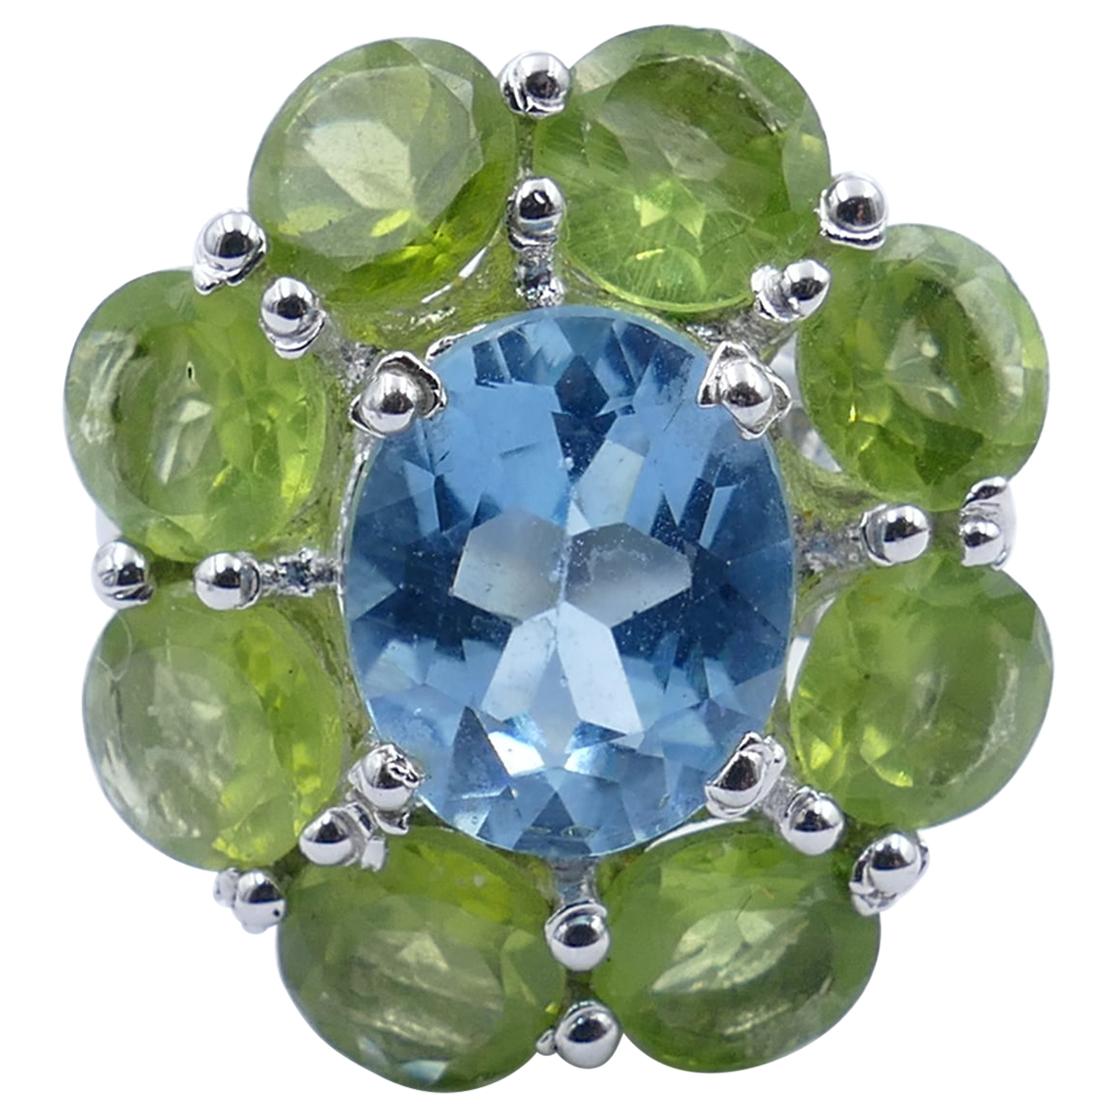 Fabulous Blue Topaz and Peridot Large Cocktail Ring Set in Sterling